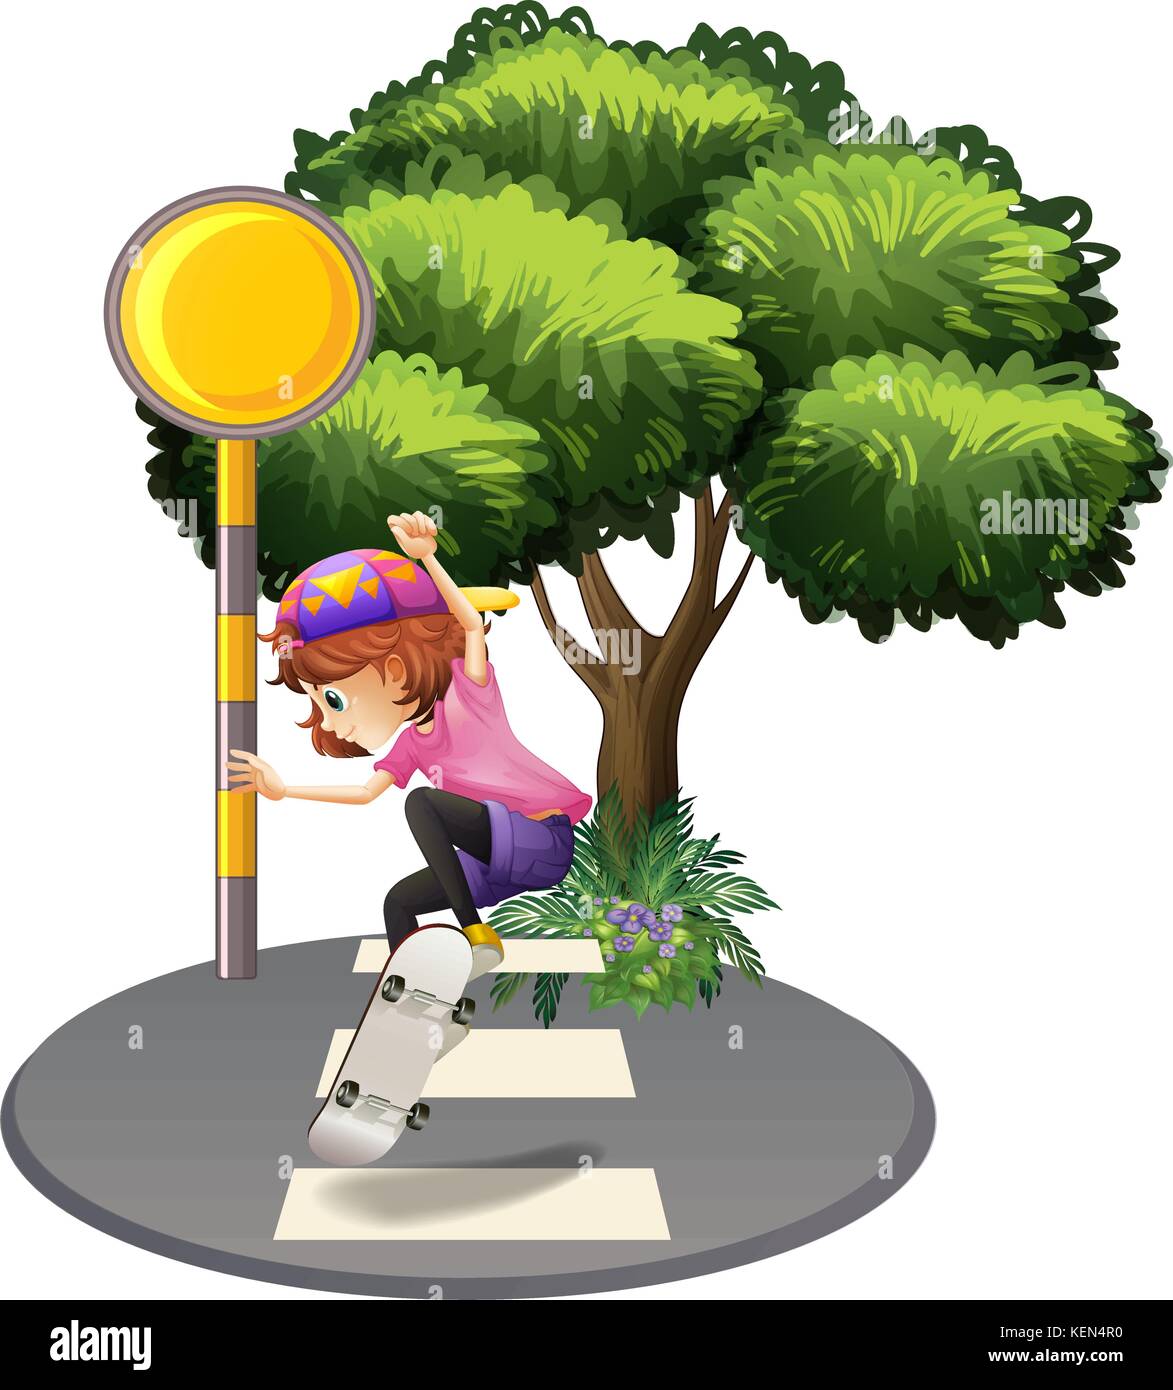 Illustration of a young lady skating at the pedestrian lane on a white background Stock Vector